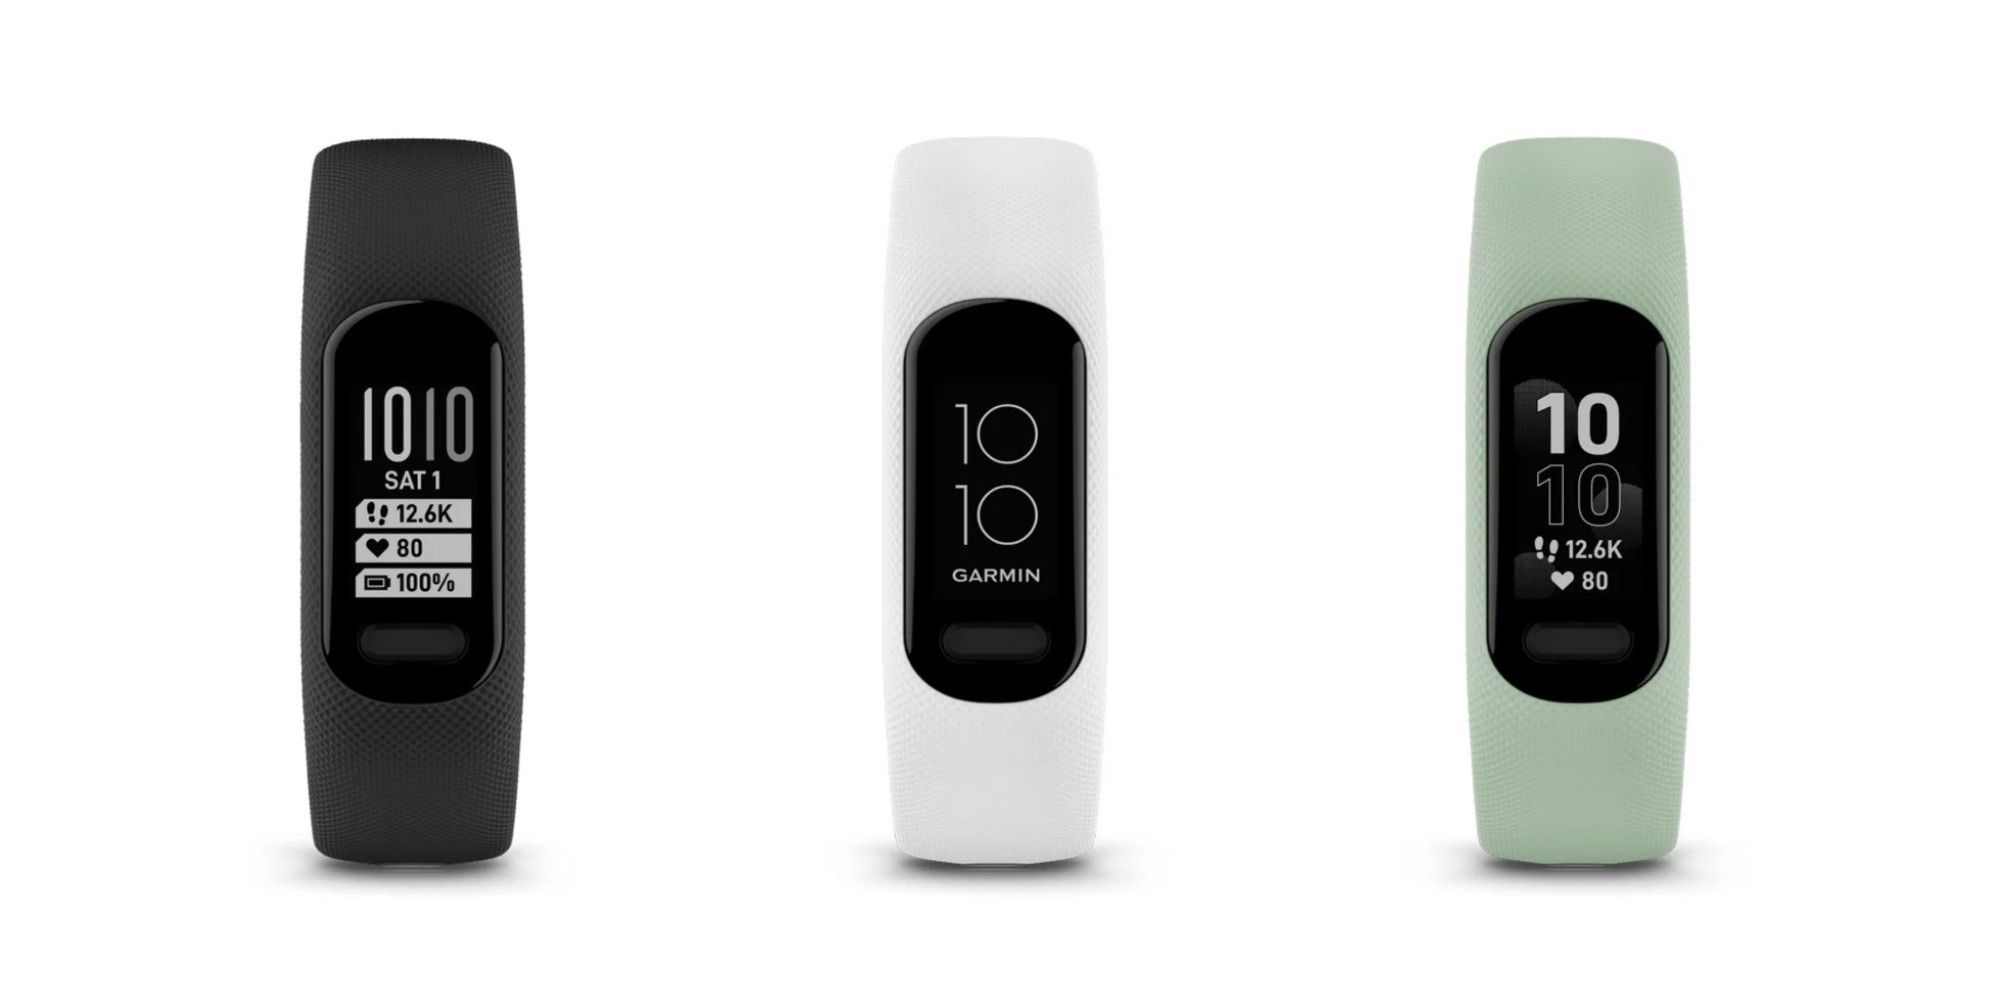 Garmin will release the Vivosmart 5 in at least three colors